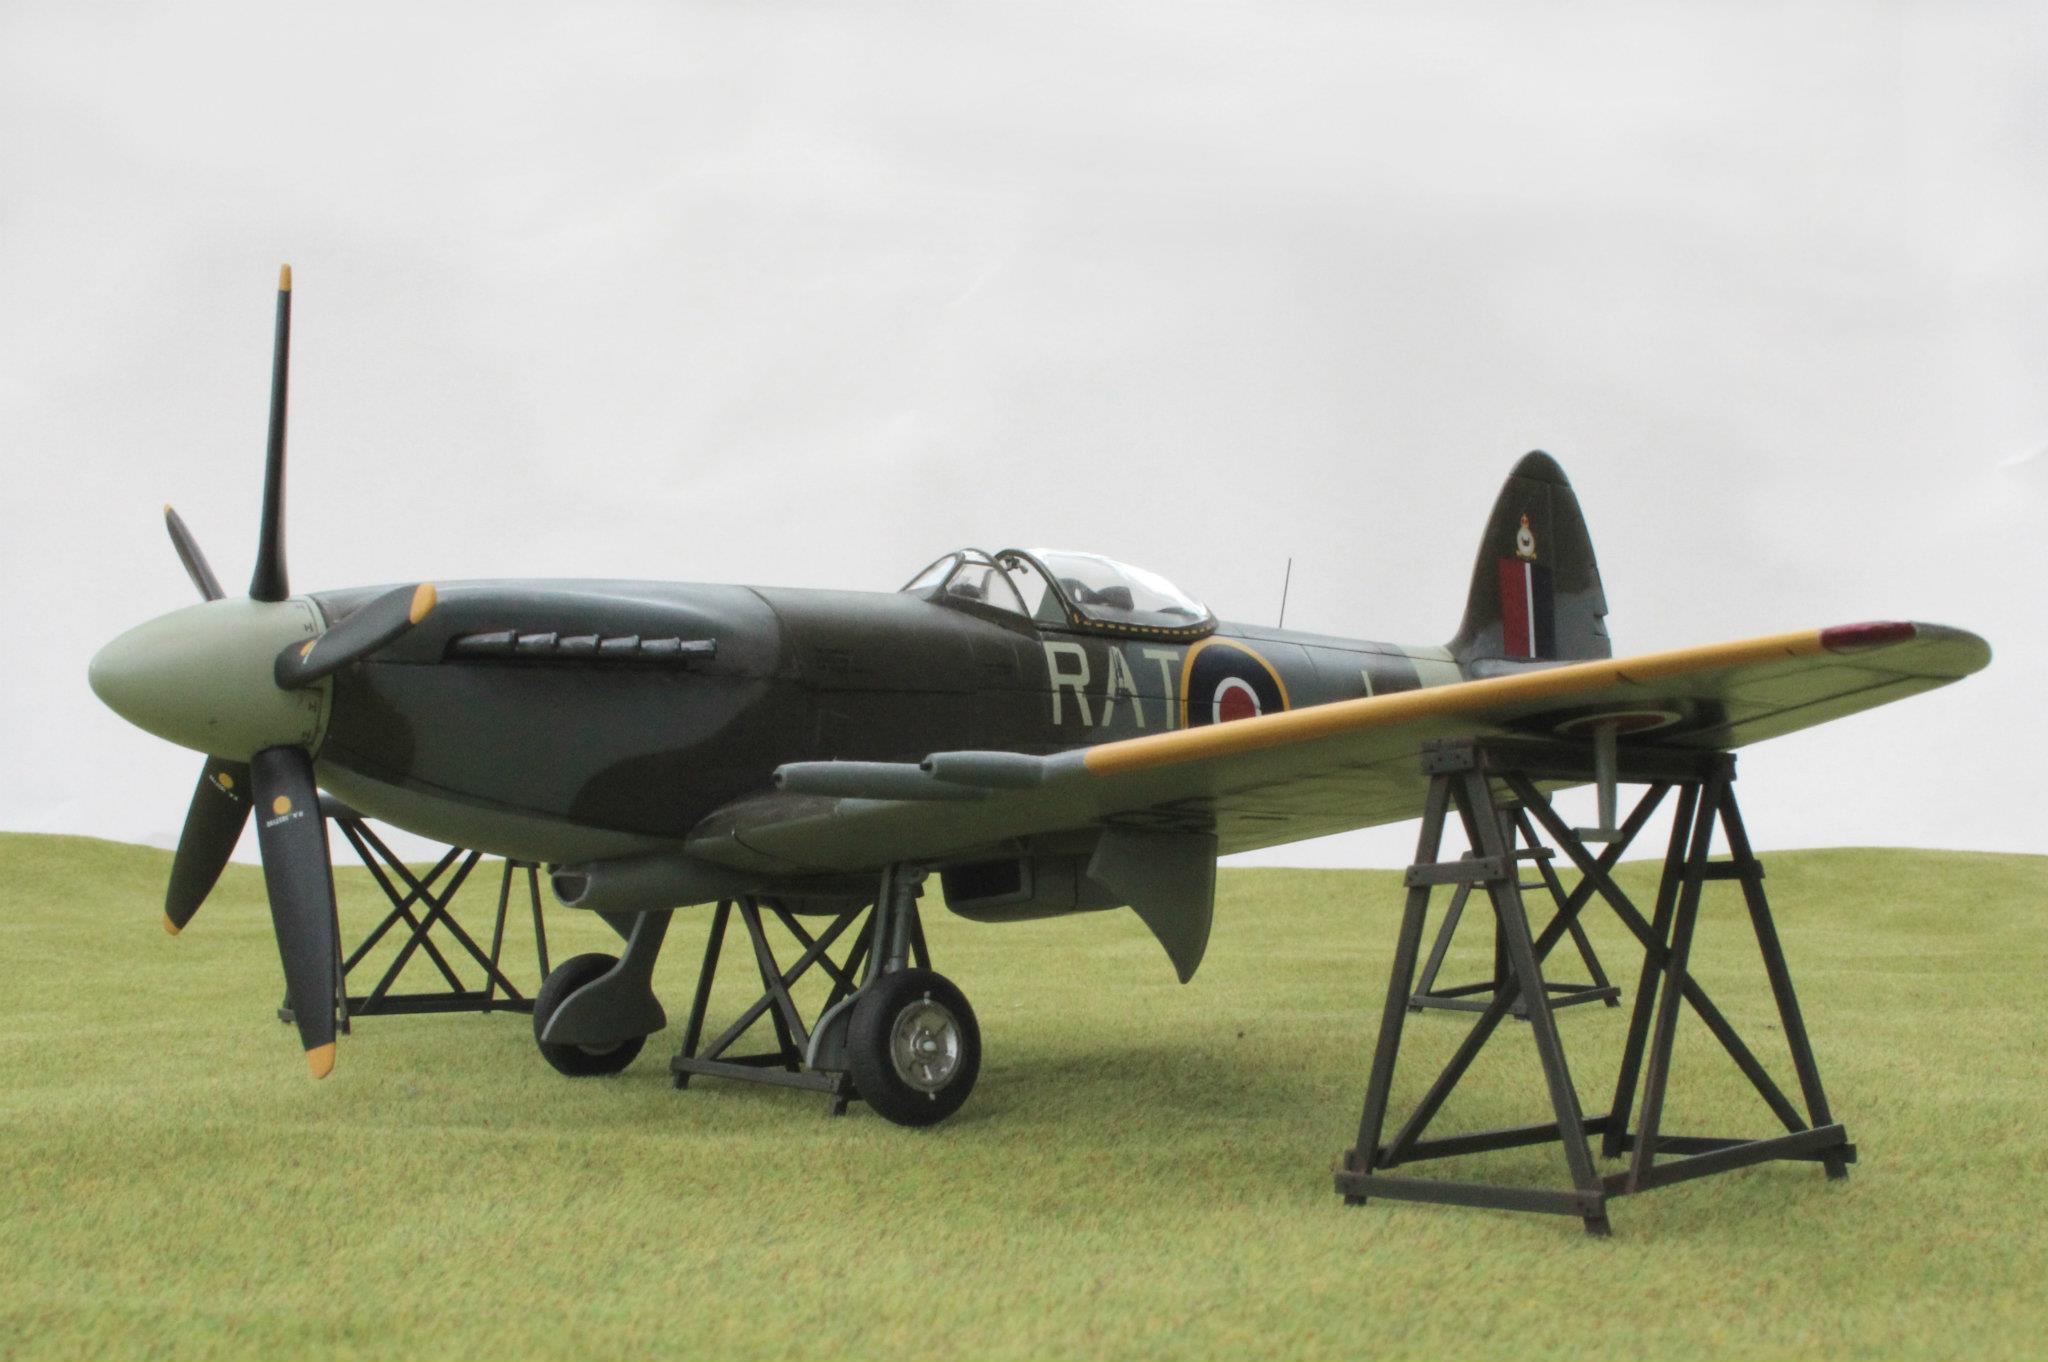 Supermarine Spitfire Mk.22, 613 (City of Manchester) Squadron, Royal Auxiliary Air Force. Revell kit in 1/32nd scale.